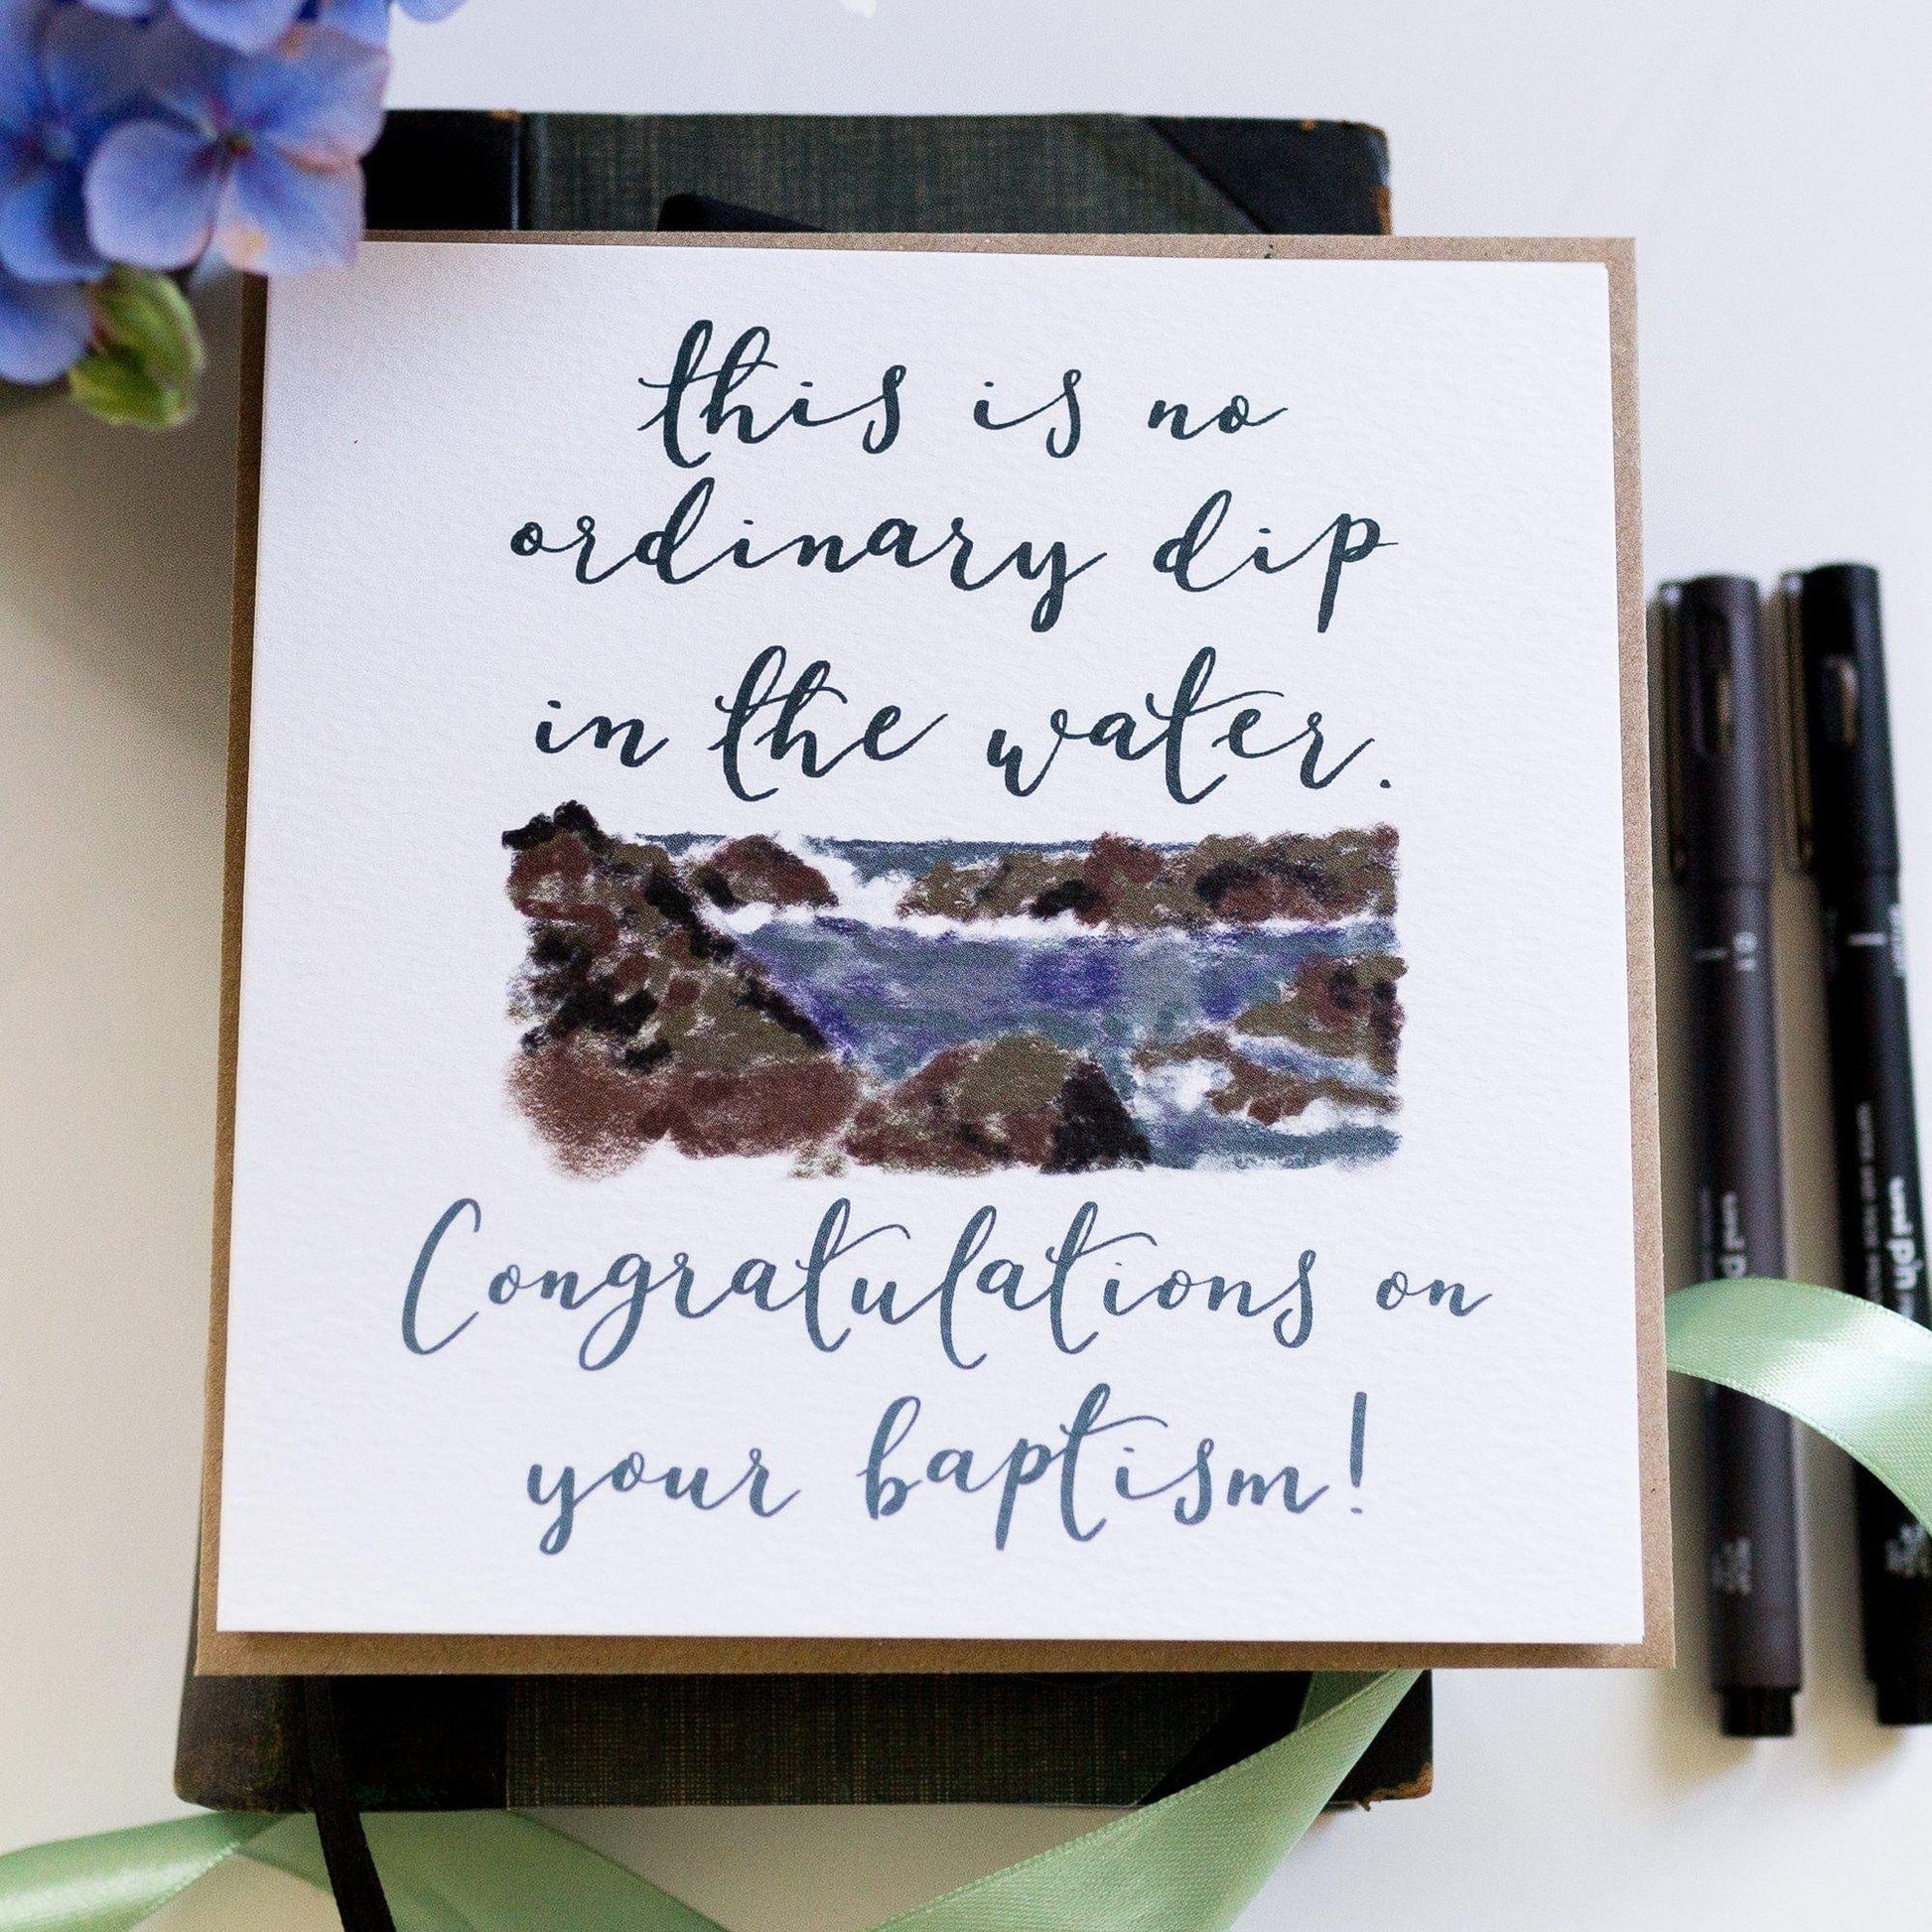 “No ordinary dip in the water” baptism card Cards And Hope Designs   